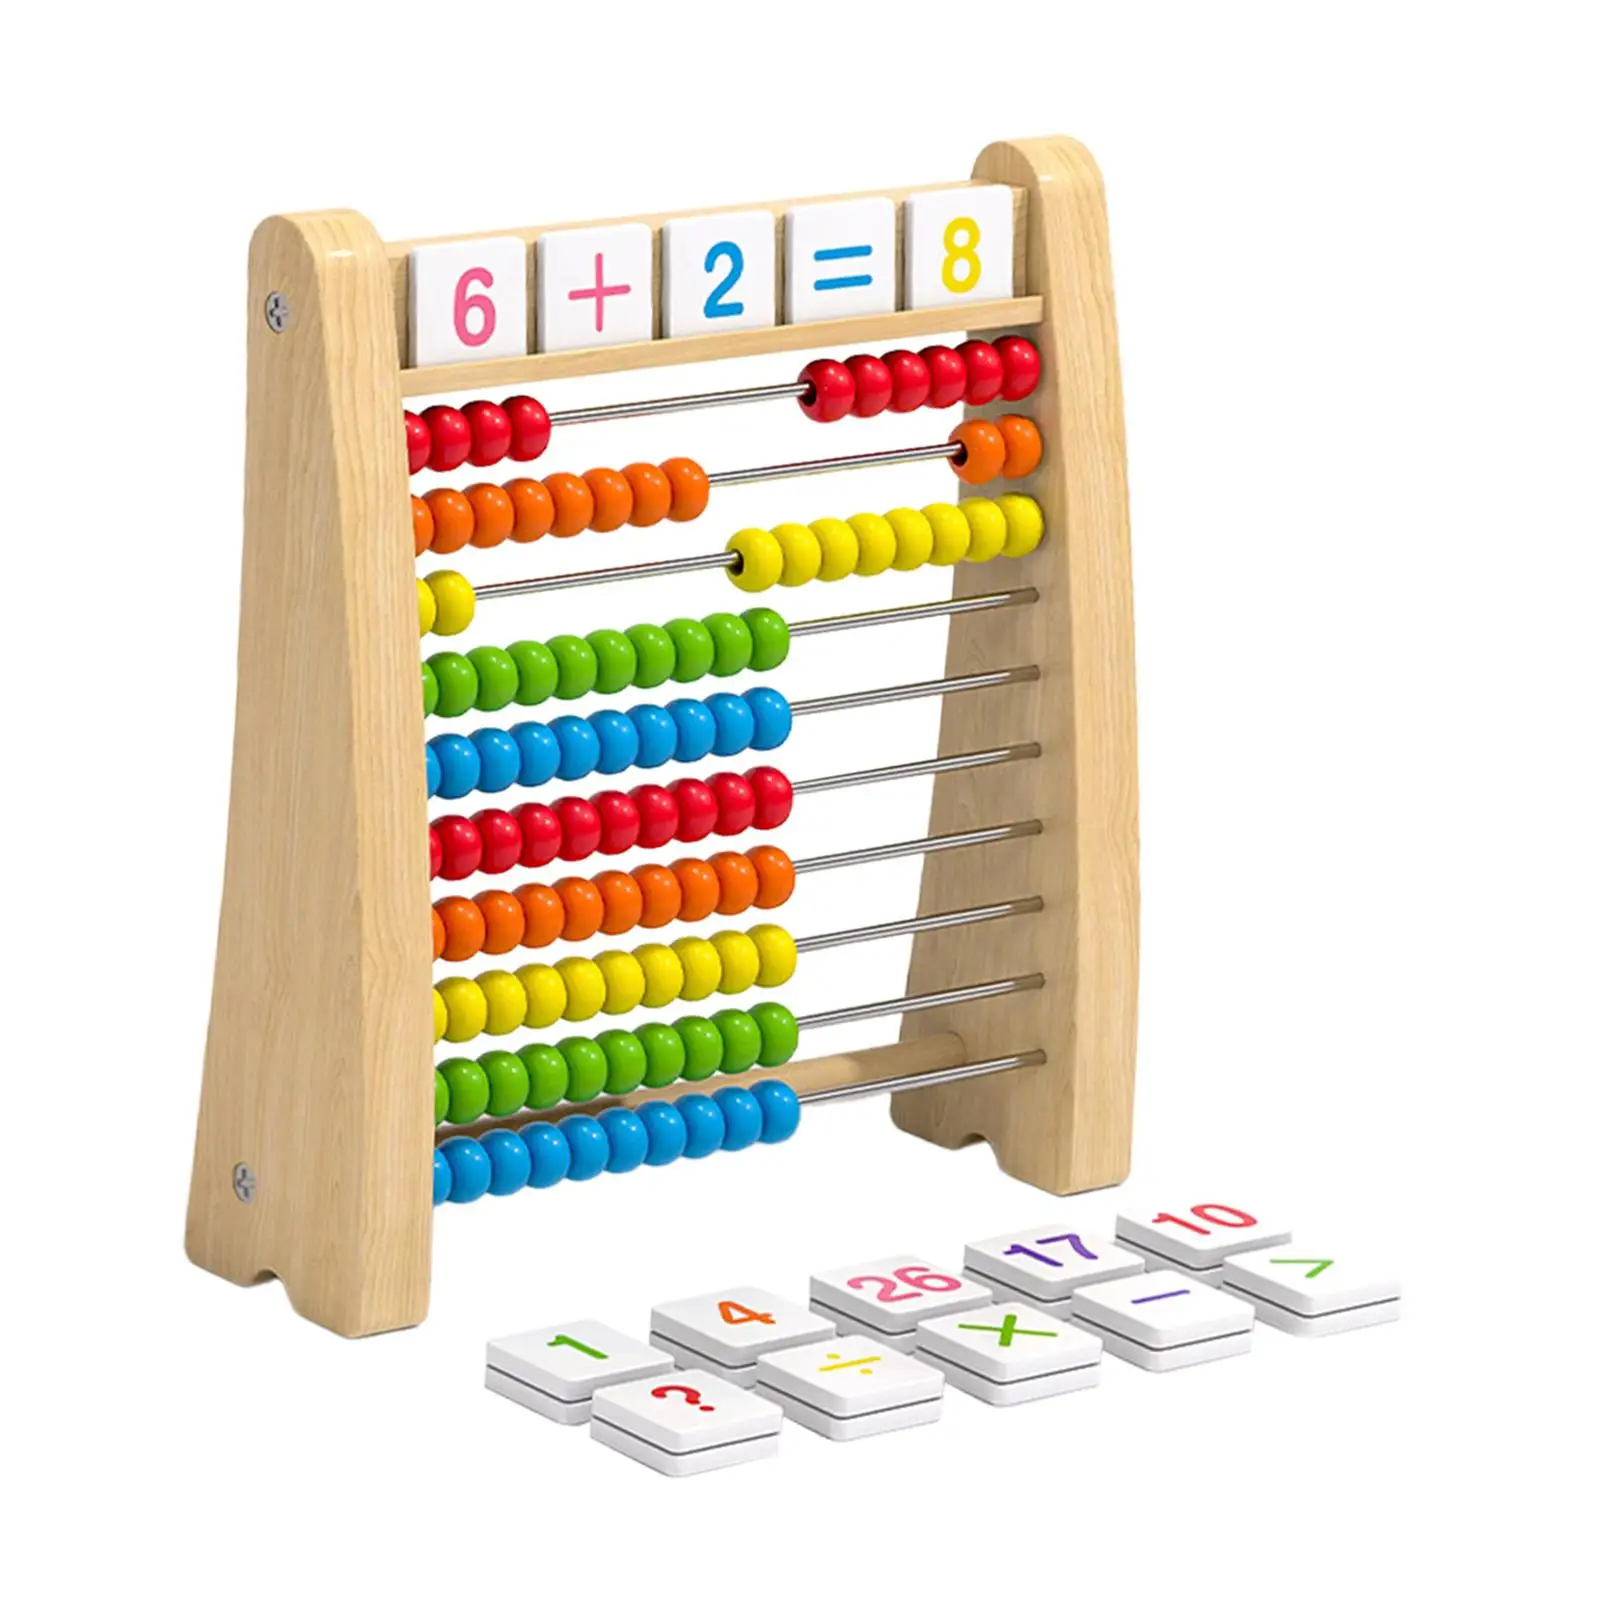 Wooden Abacus Educational Counting Toy Ten Frame Set Math Manipulatives for Kindergarten